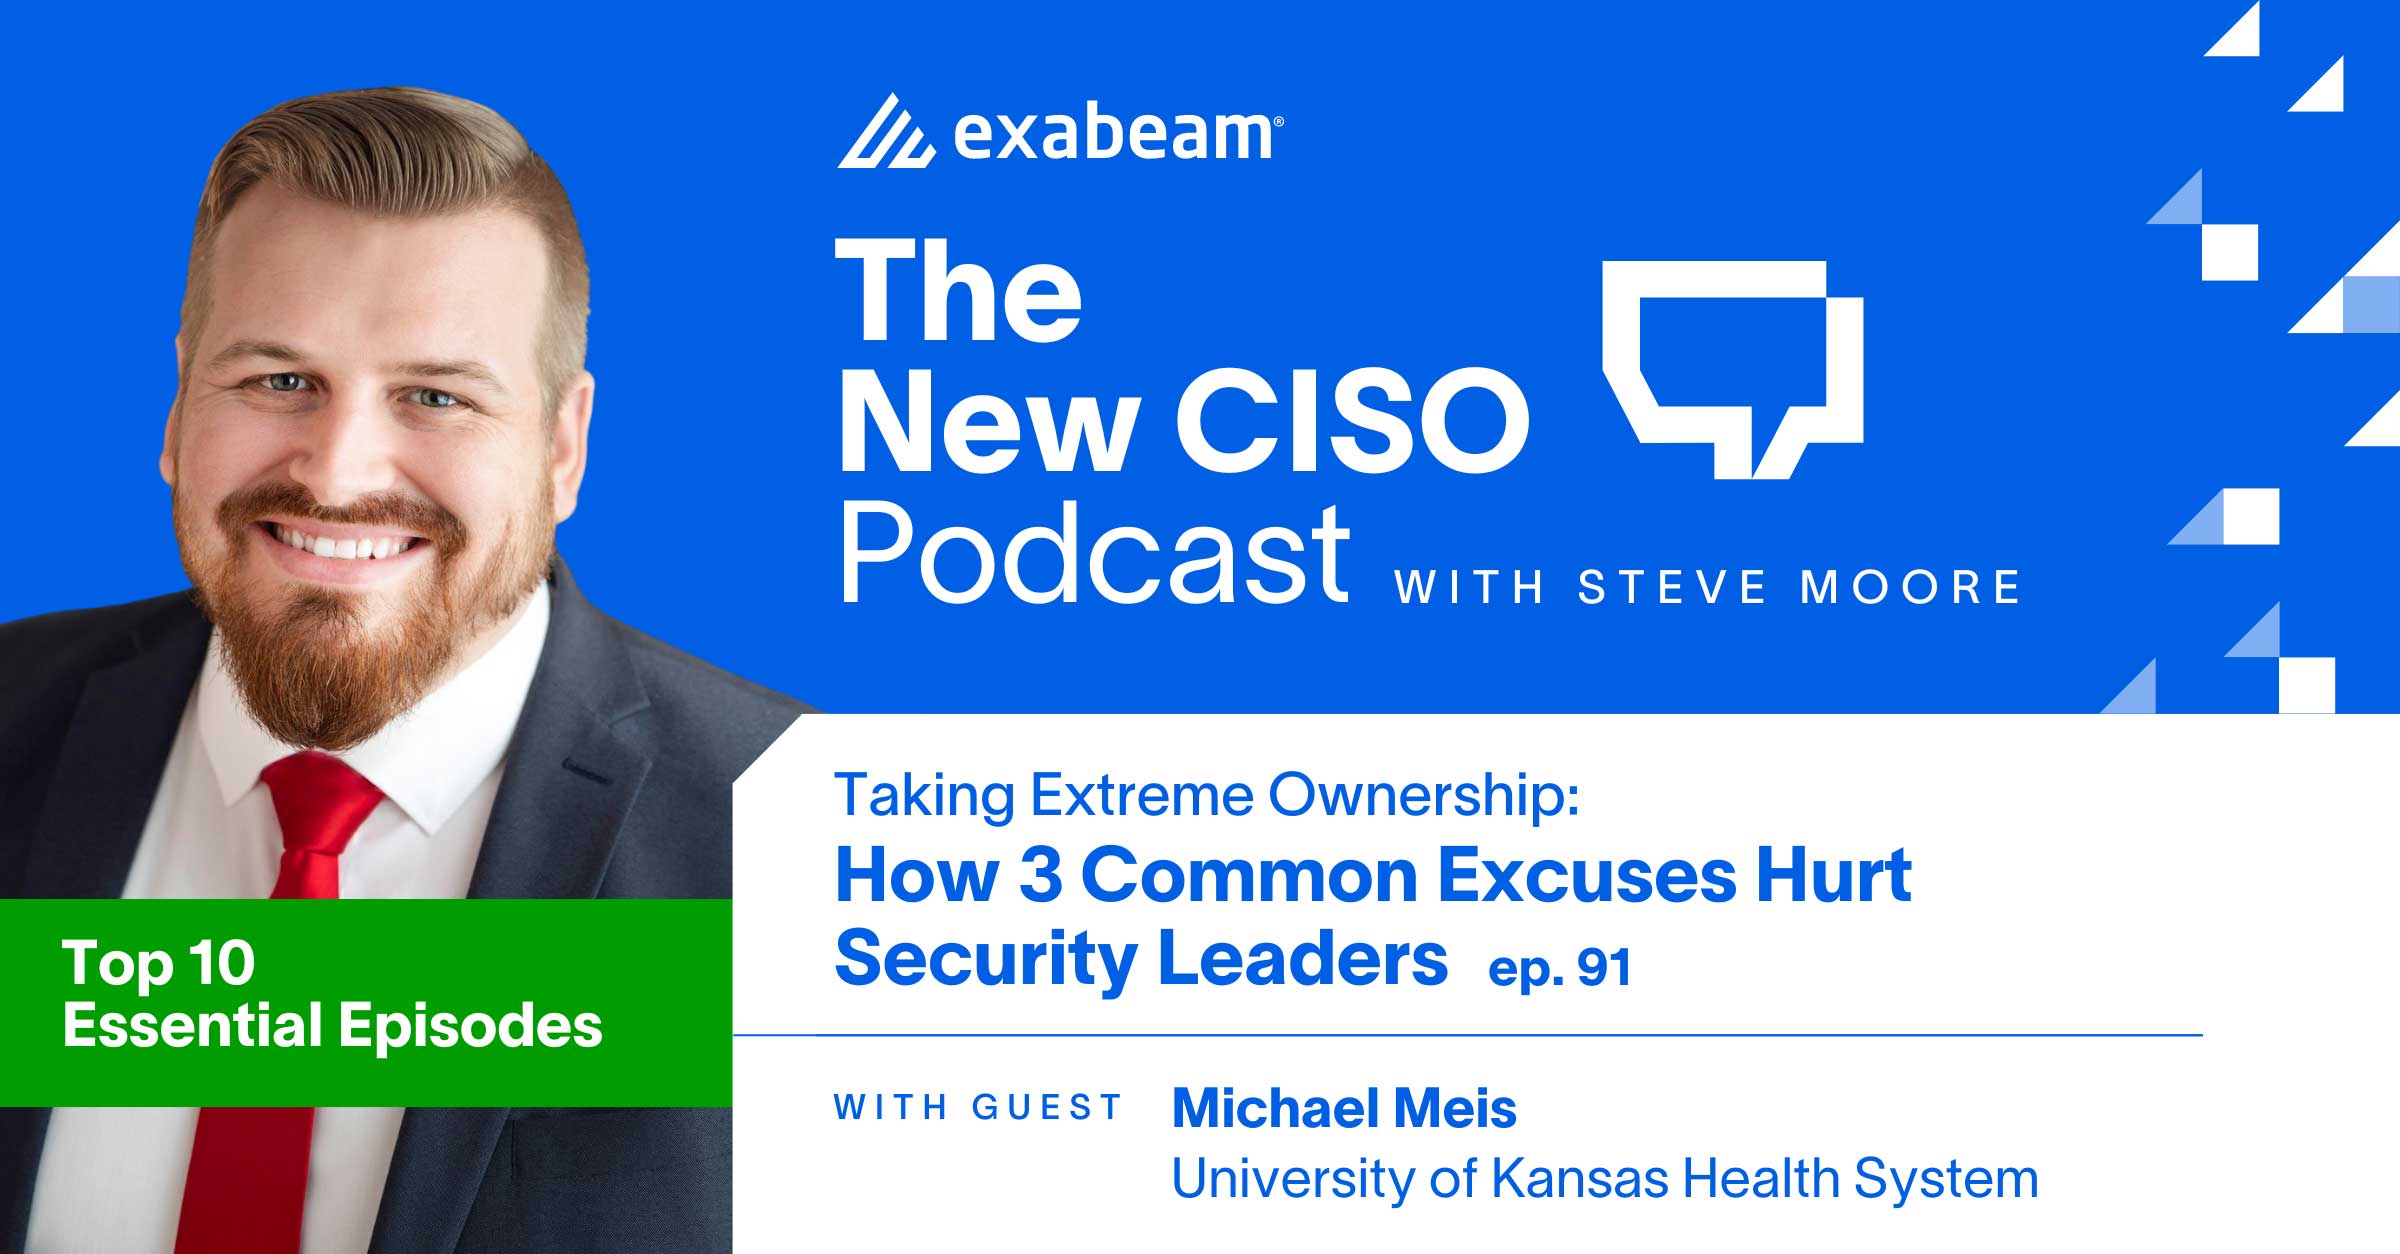 The New CISO Podcast Episode 91: "Taking Extreme Ownership: How 3 Common Excuses Hurt Security Leaders" with guest Michael Meis